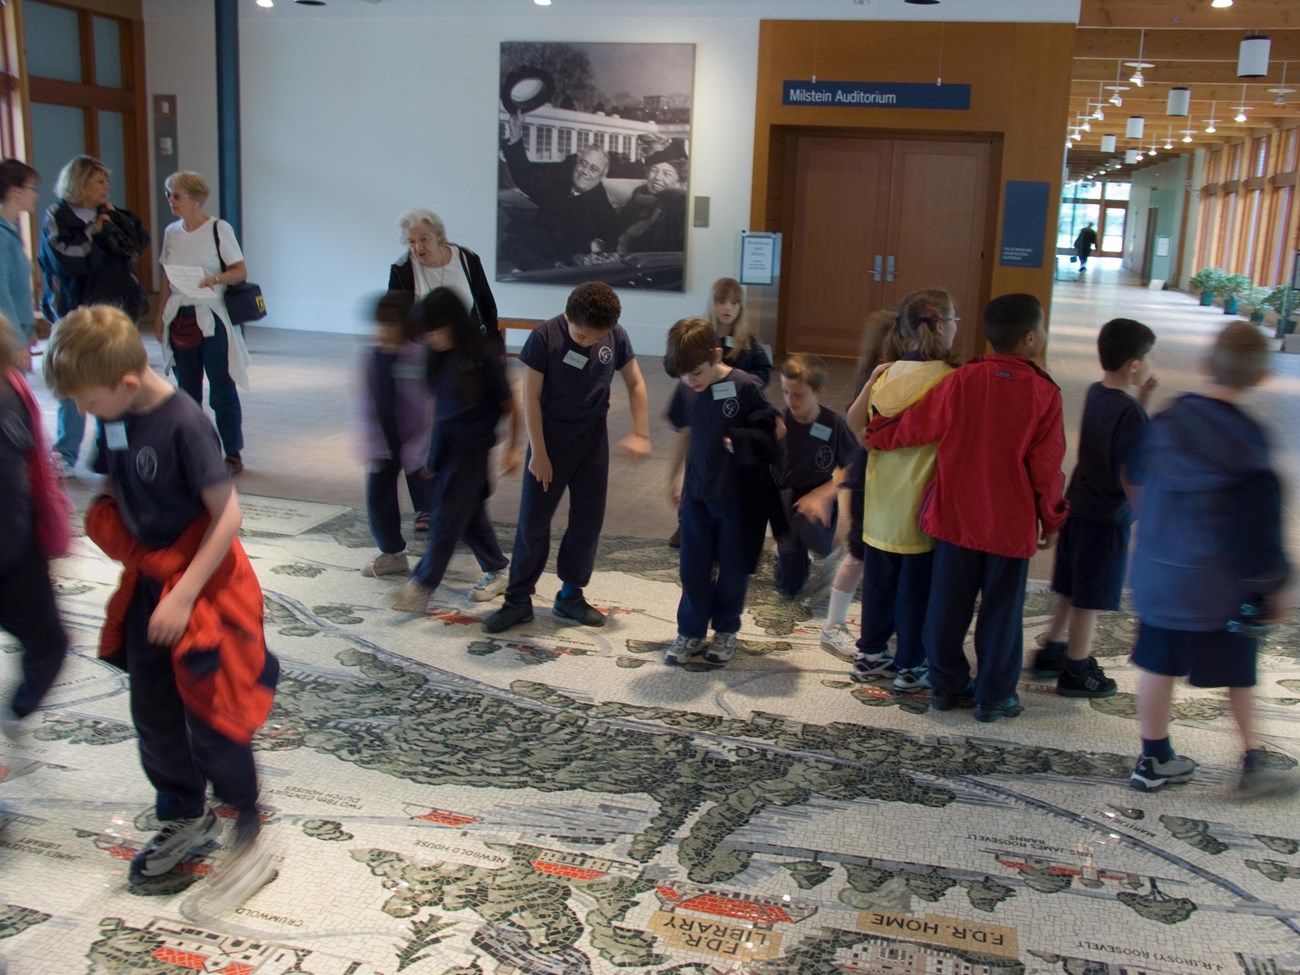 A group of adults and children viewing a mosaic map on the floor of the visitor center.